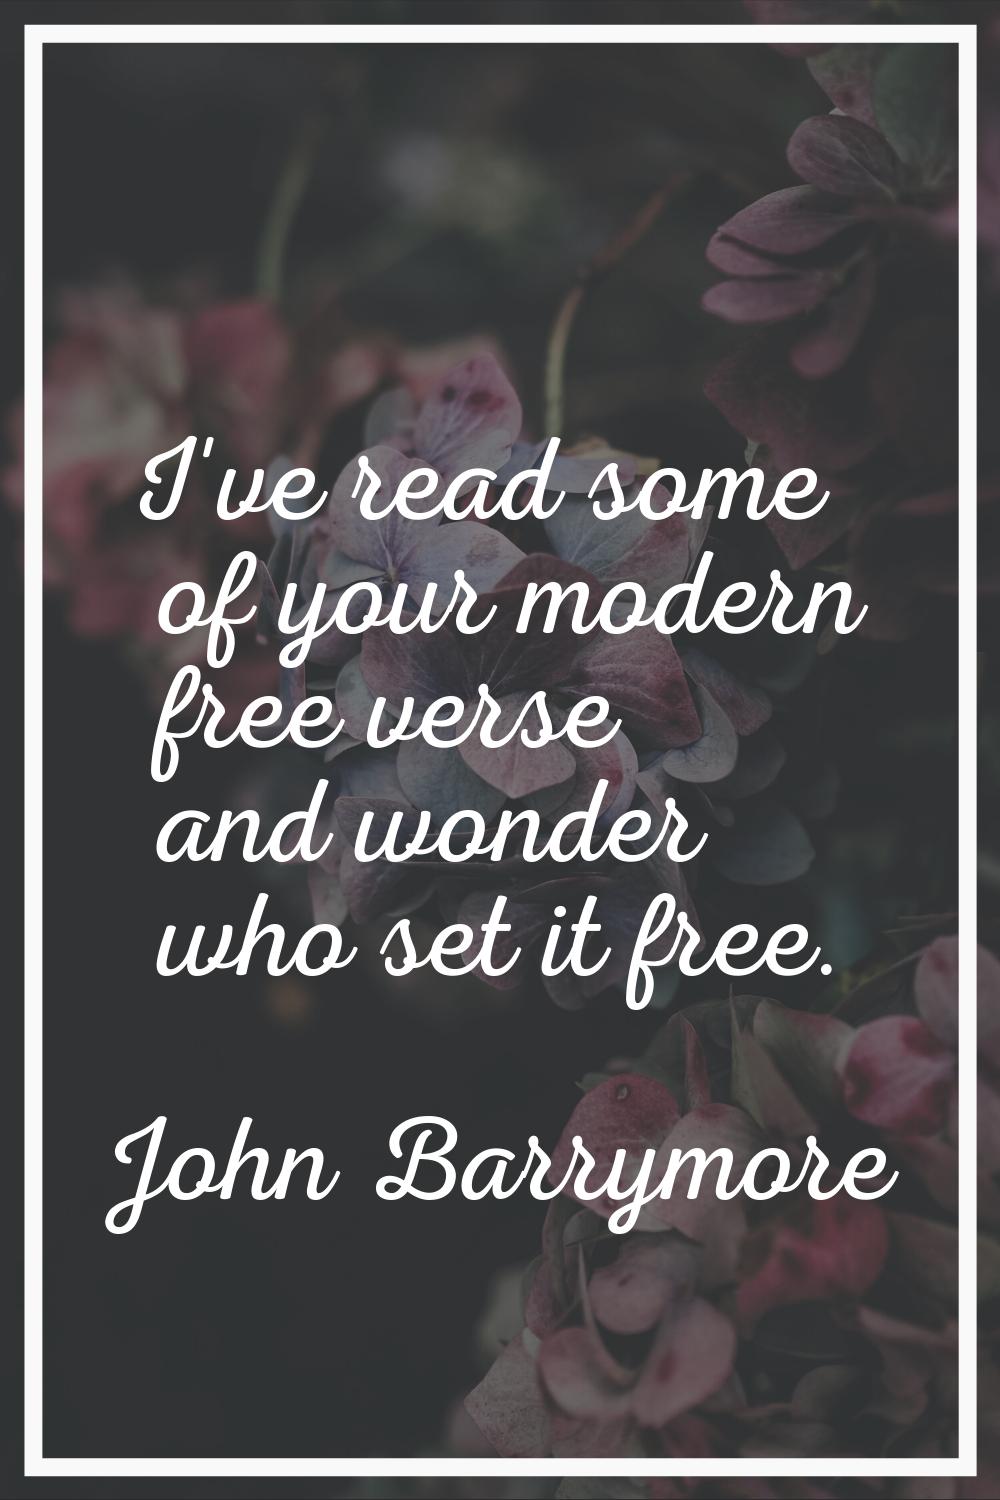 I've read some of your modern free verse and wonder who set it free.